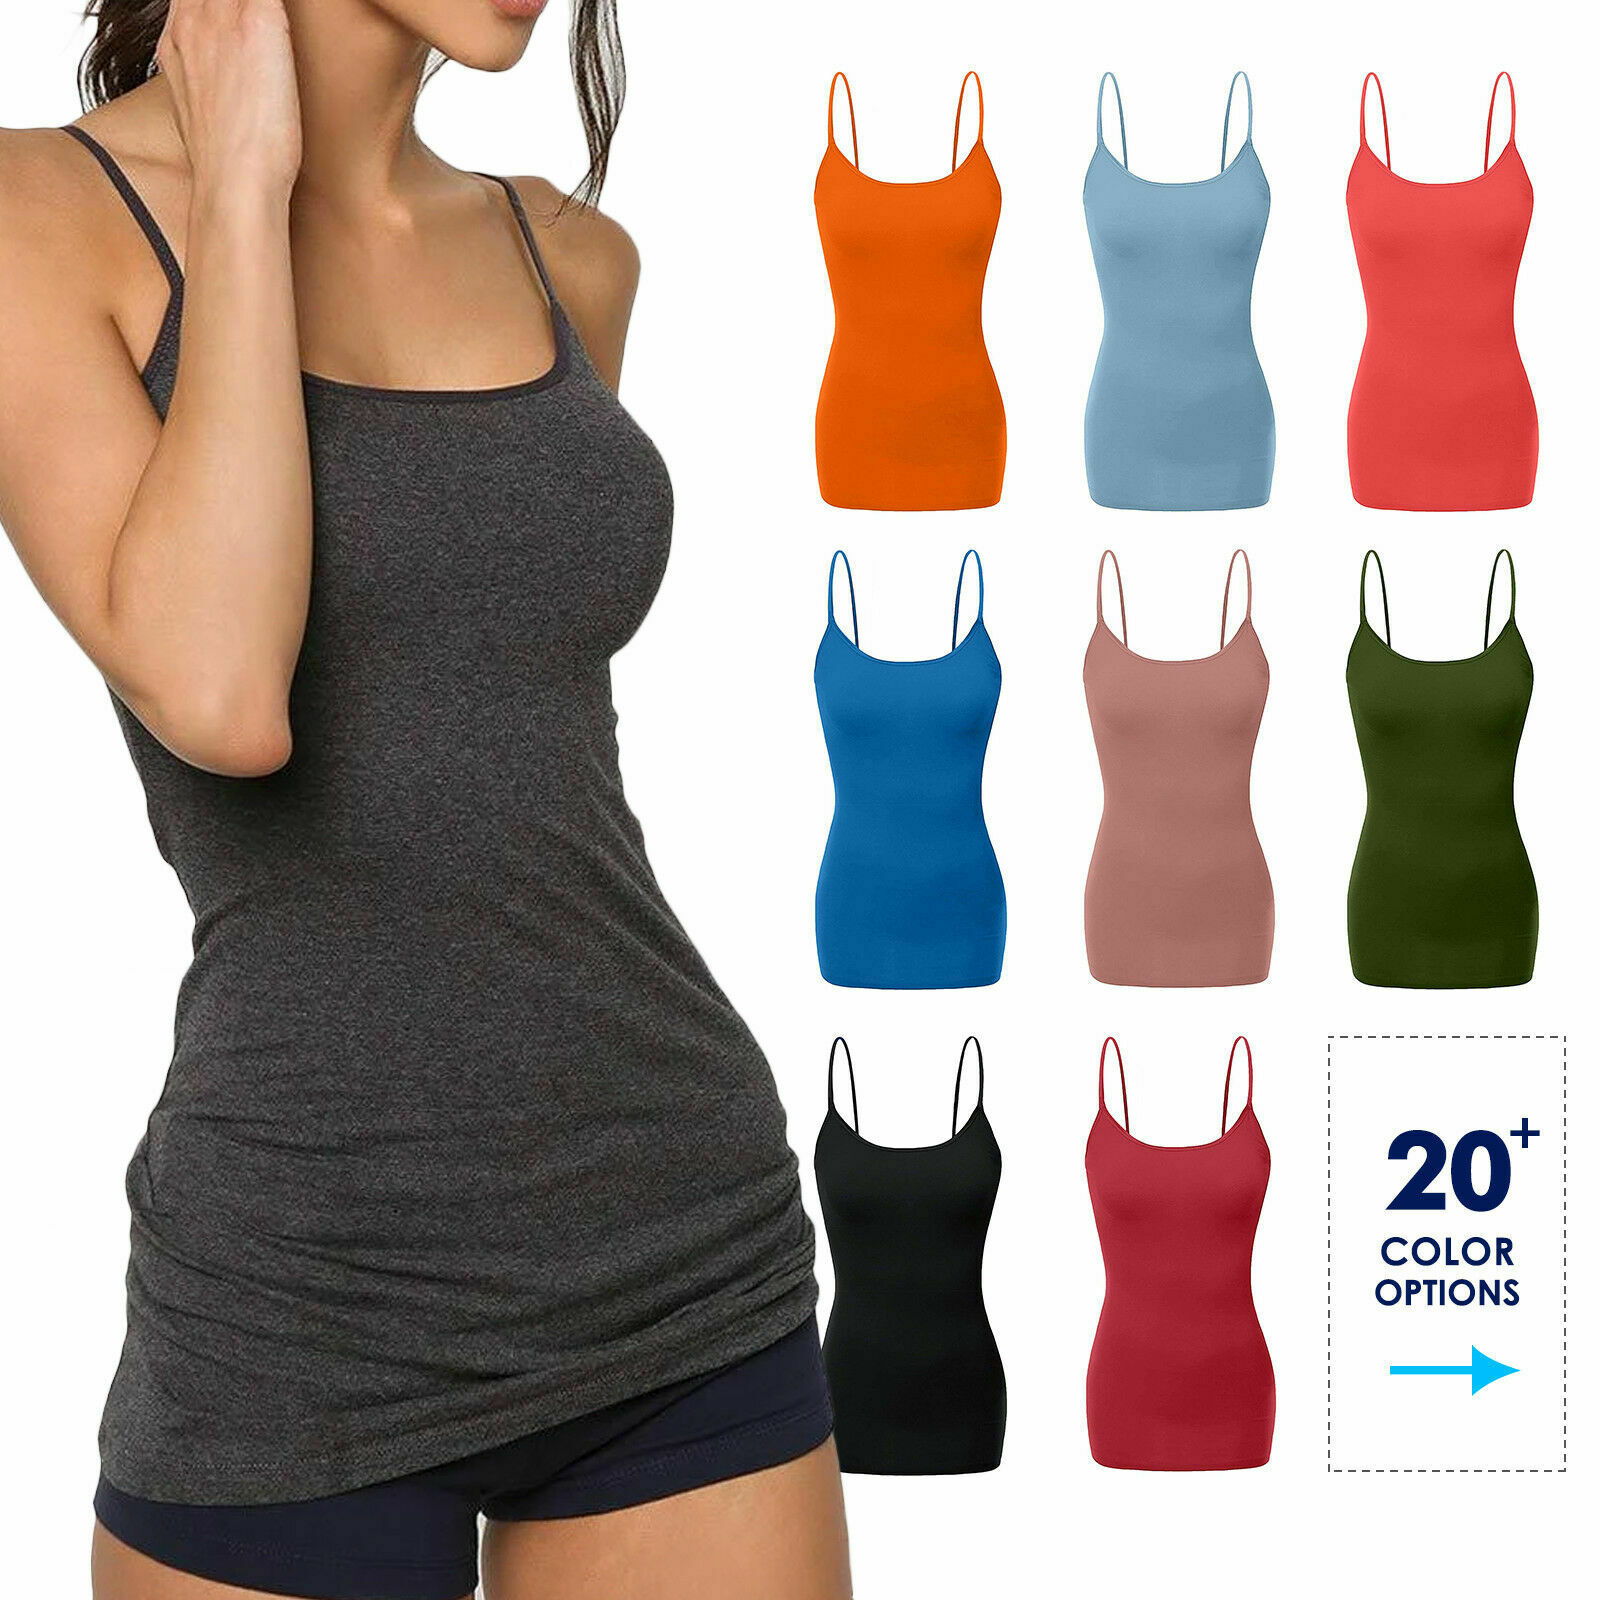 Women's Cami Tank Top Tops Long Layering Casual Basic Camisole Plain Plus S -3xl